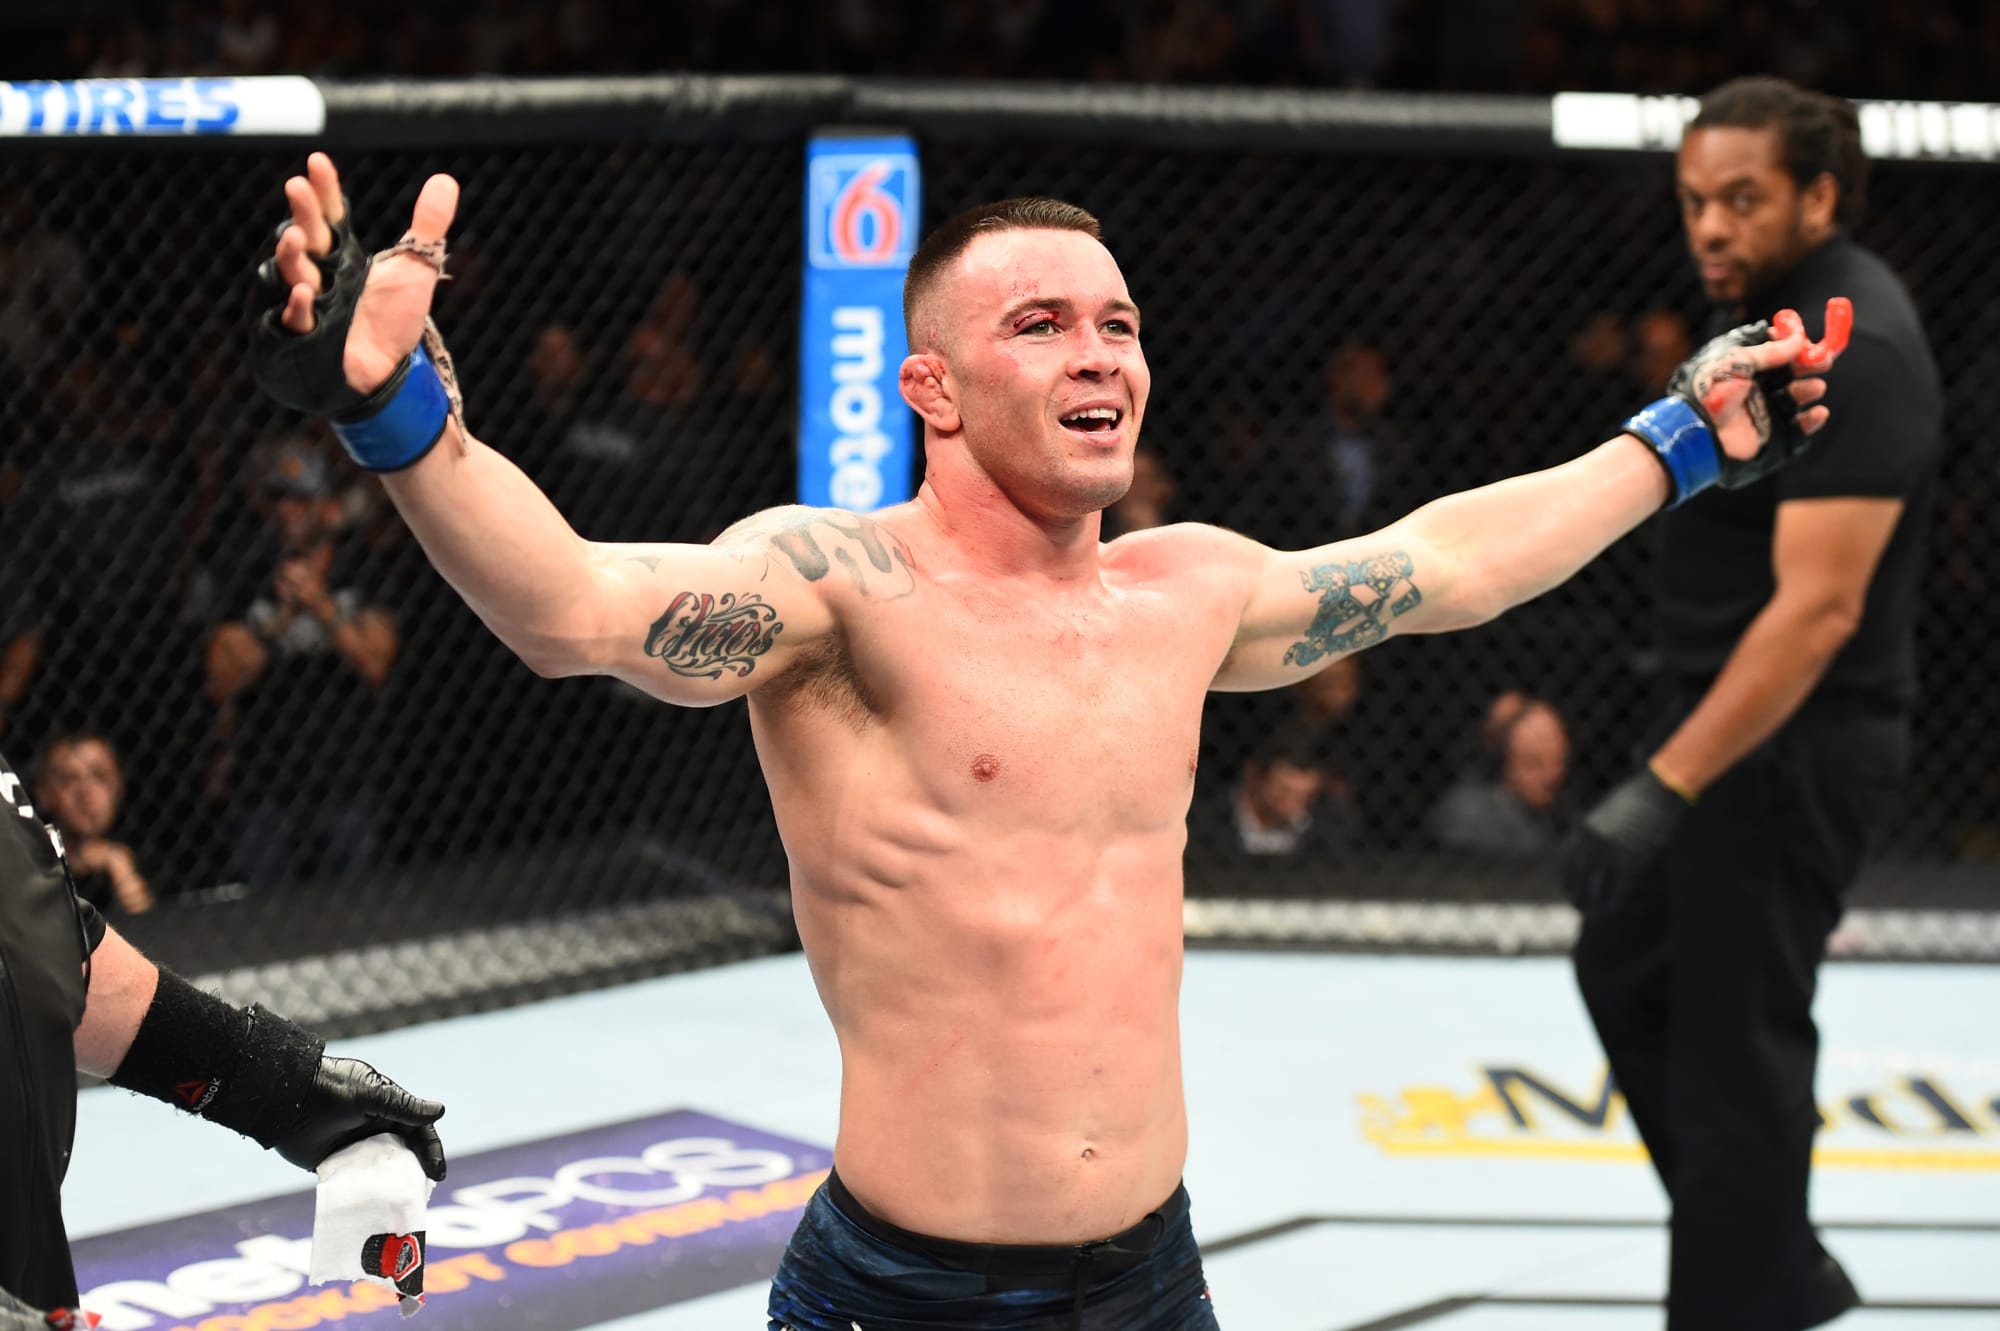 Colby Covington Took The Welterweight Belt To Meet Donald Trump